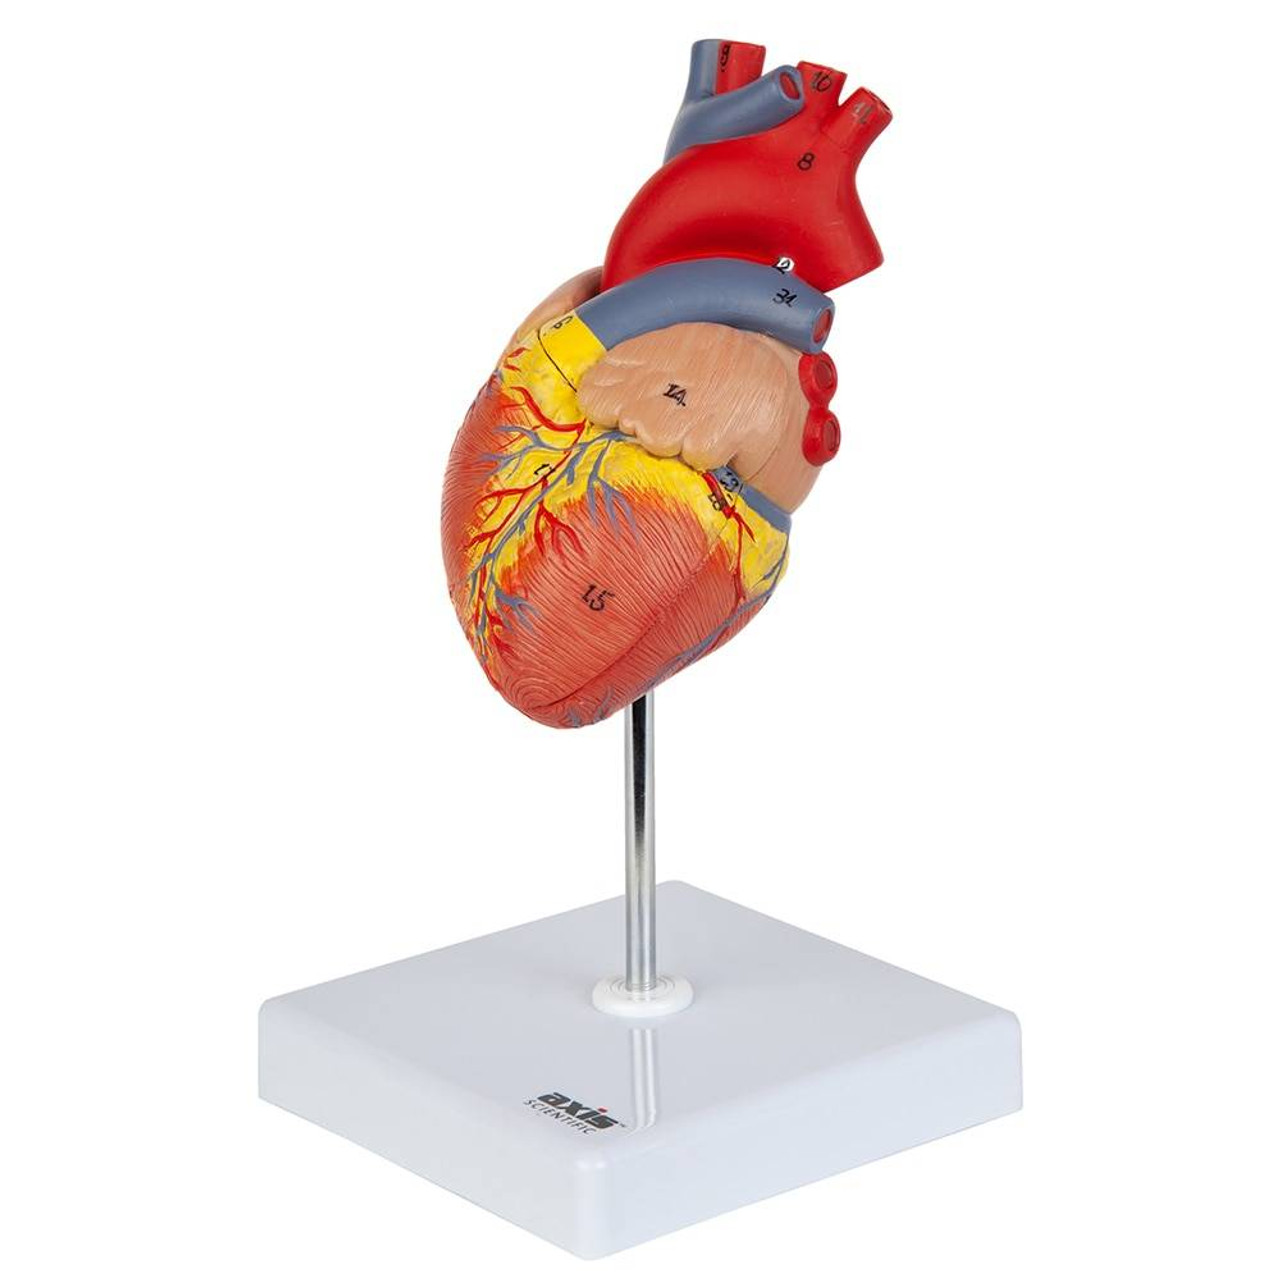 https://cdn11.bigcommerce.com/s-pimv2ff7eu/images/stencil/1280x1280/products/117/19399/axis-scientific-axis-scientific-2-part-deluxe-life-size-human-heart__78607.1617753524.jpg?c=1?imbypass=on